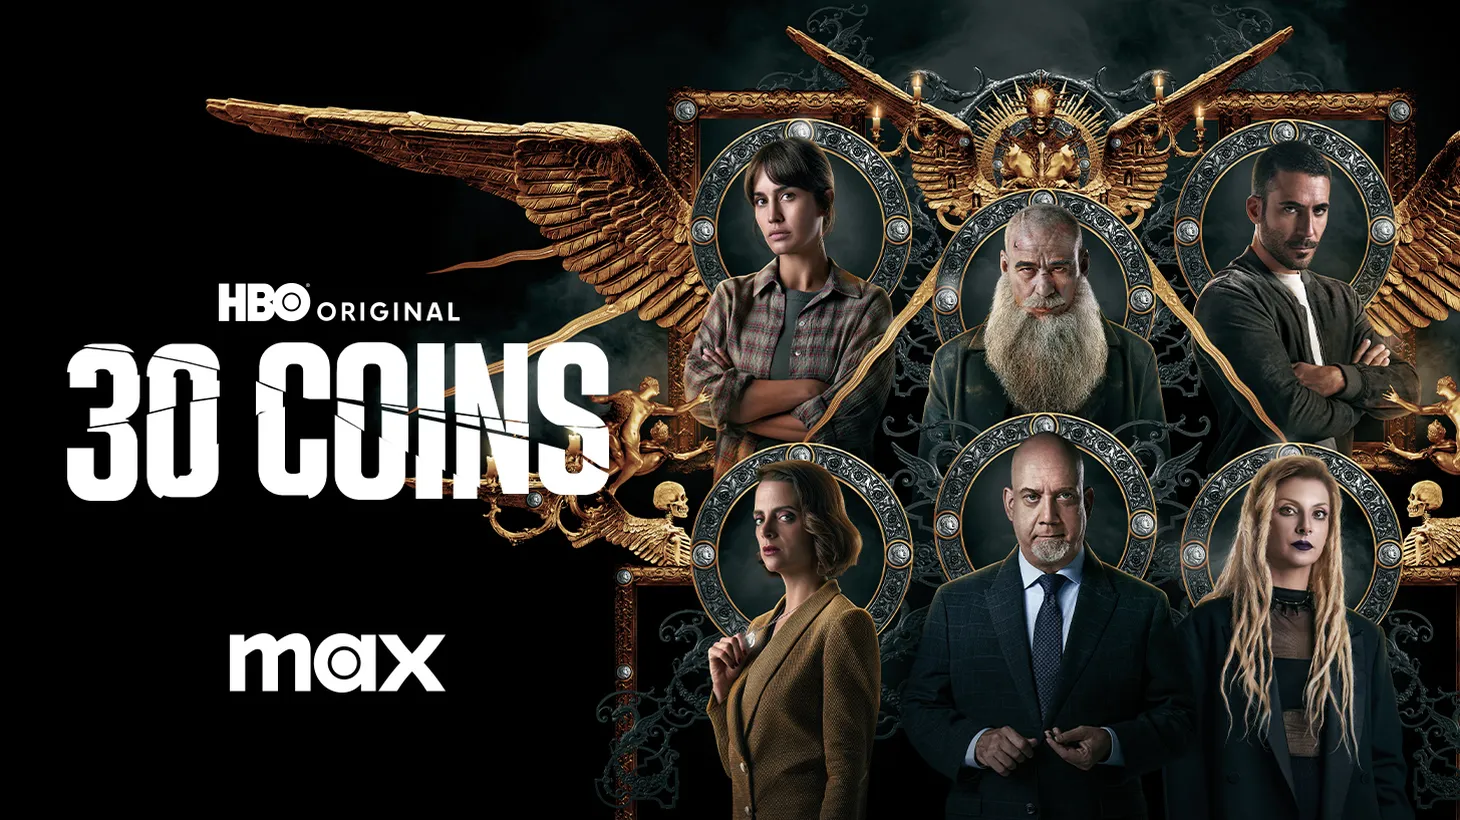 Poster image art for Season 2 of HBO's, 30 Coins